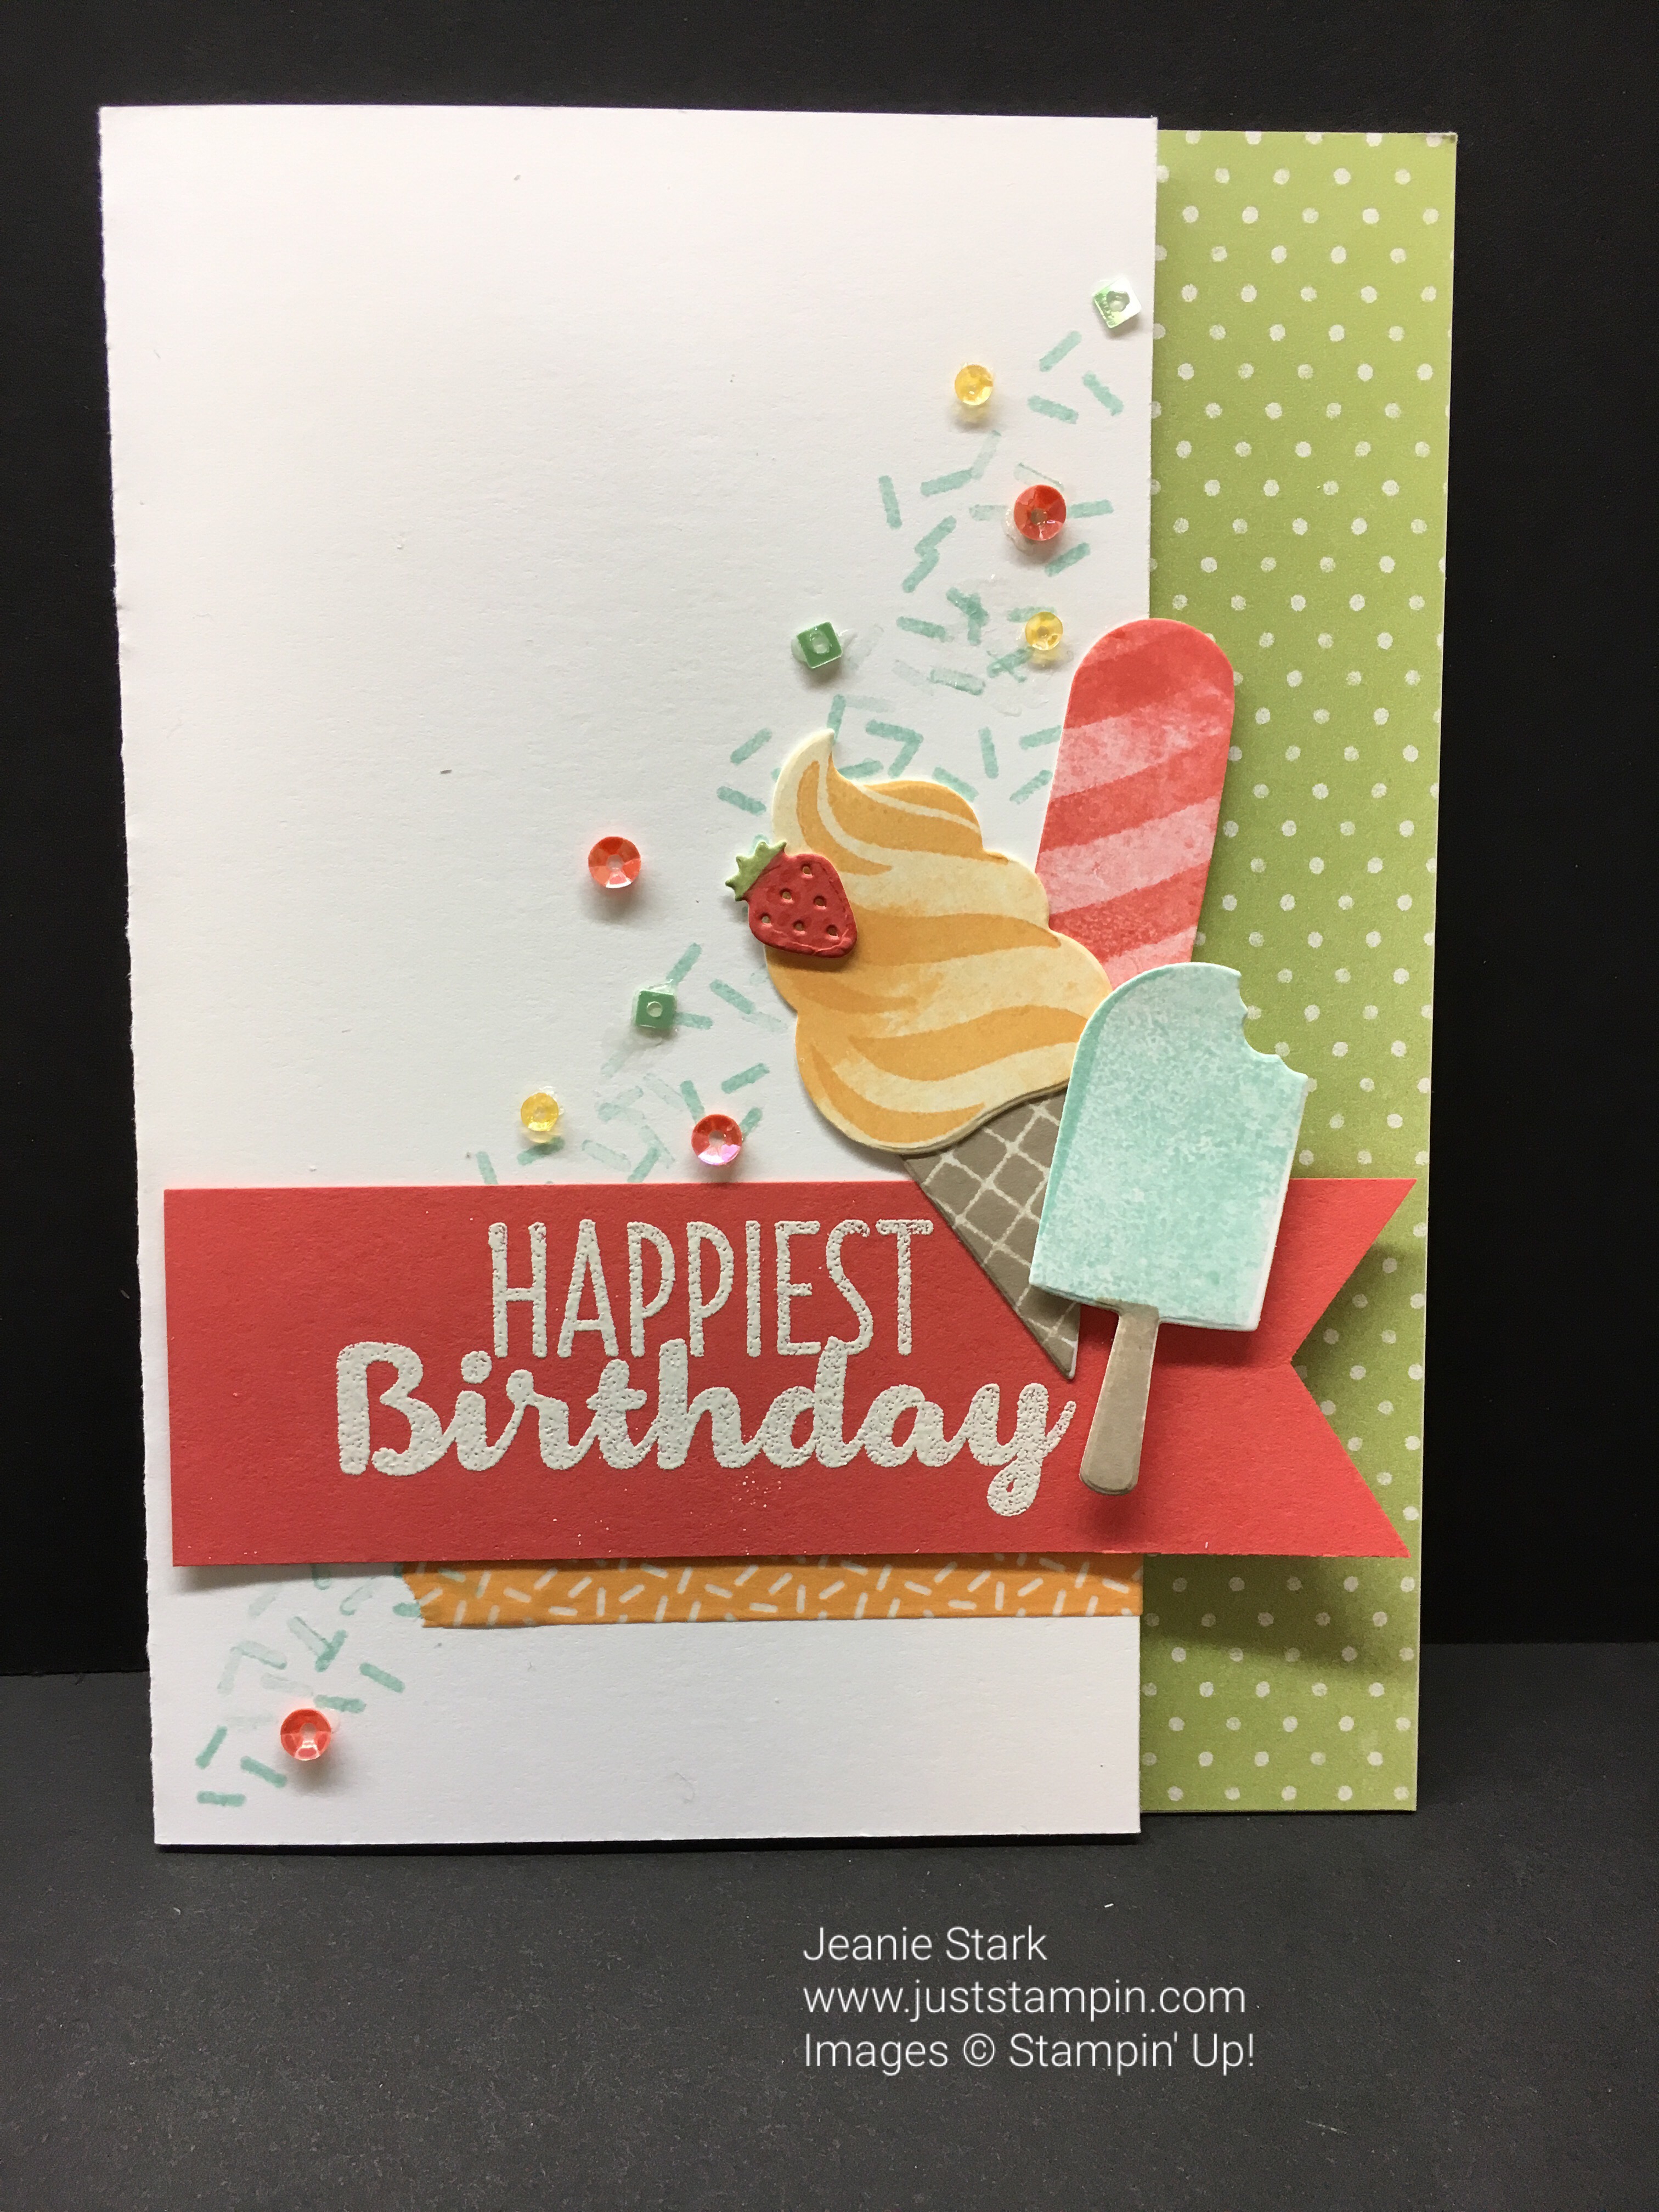 Stampin Up Cool Treats card idea - Jeanie Stark StampinUp